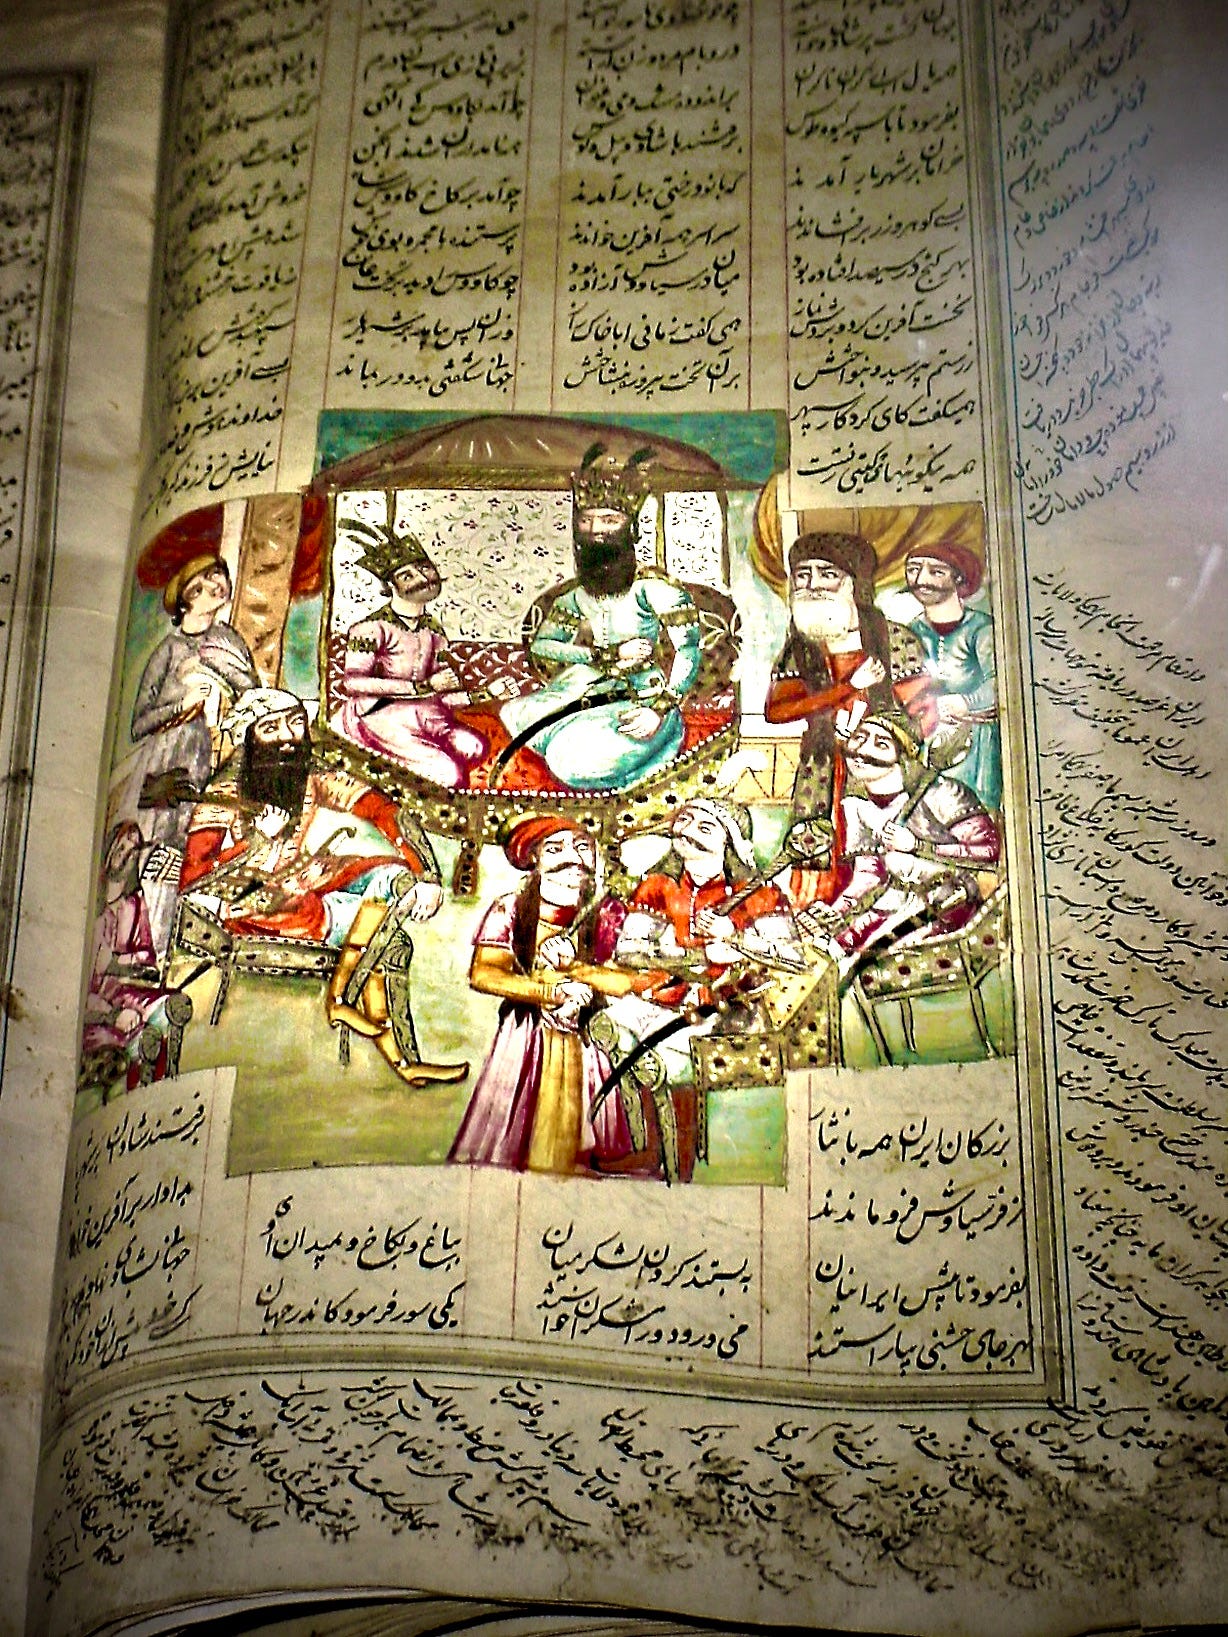 THE SHAHNAMEH, by Fersdowsi, book of Persian "king of kings" housed in the library collection in San Lazzaro island off the coast of Venice